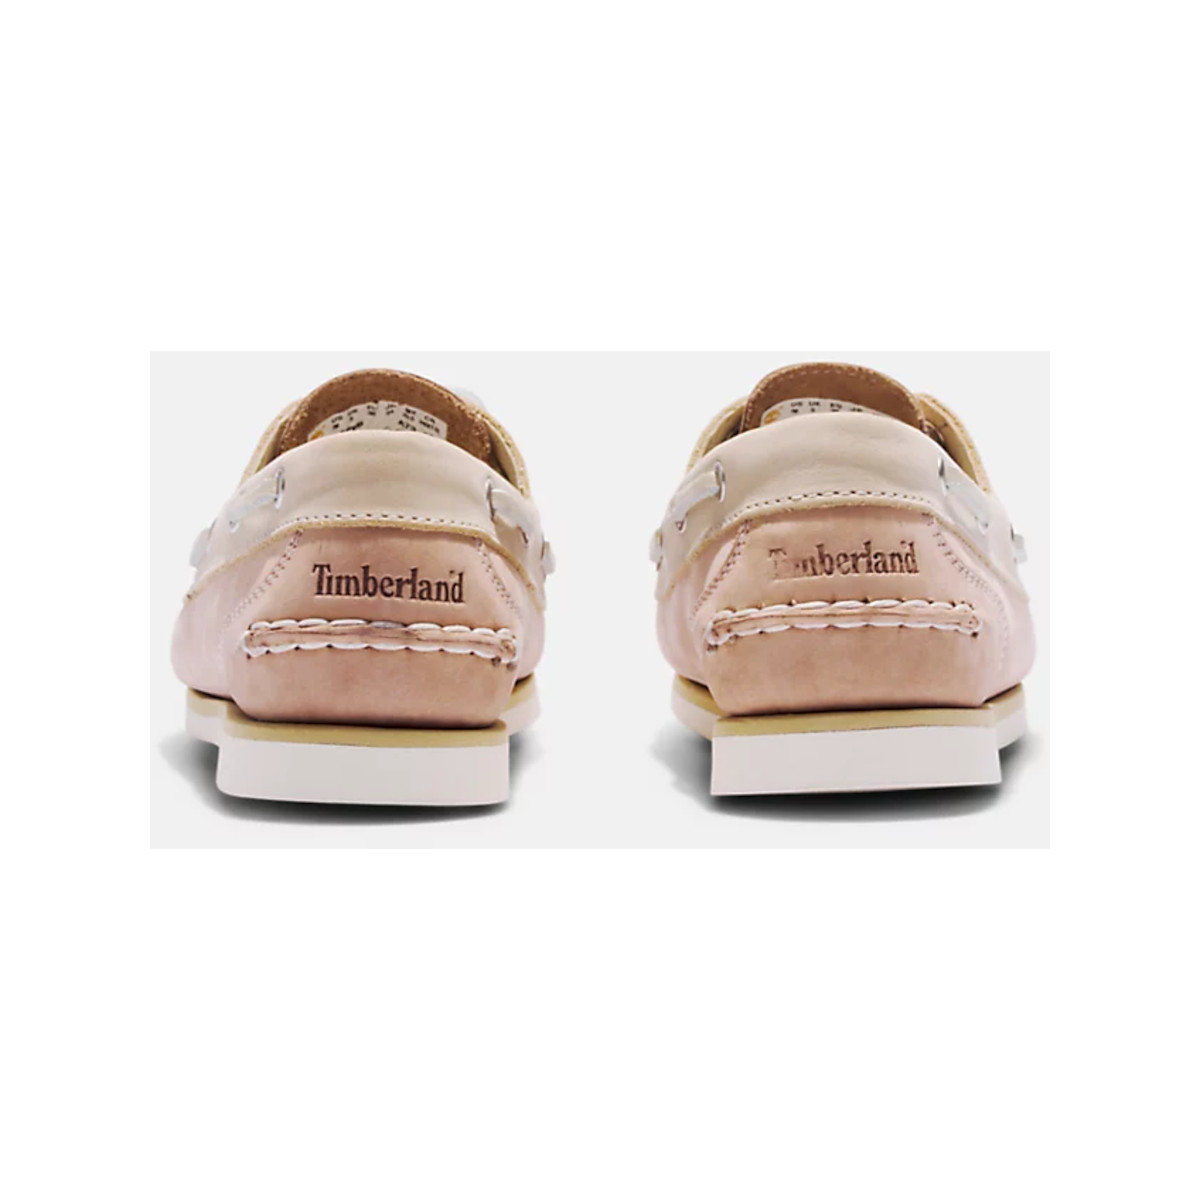 Timberland Classic Boat chaussure bateau femme - beige clair, pointure 39